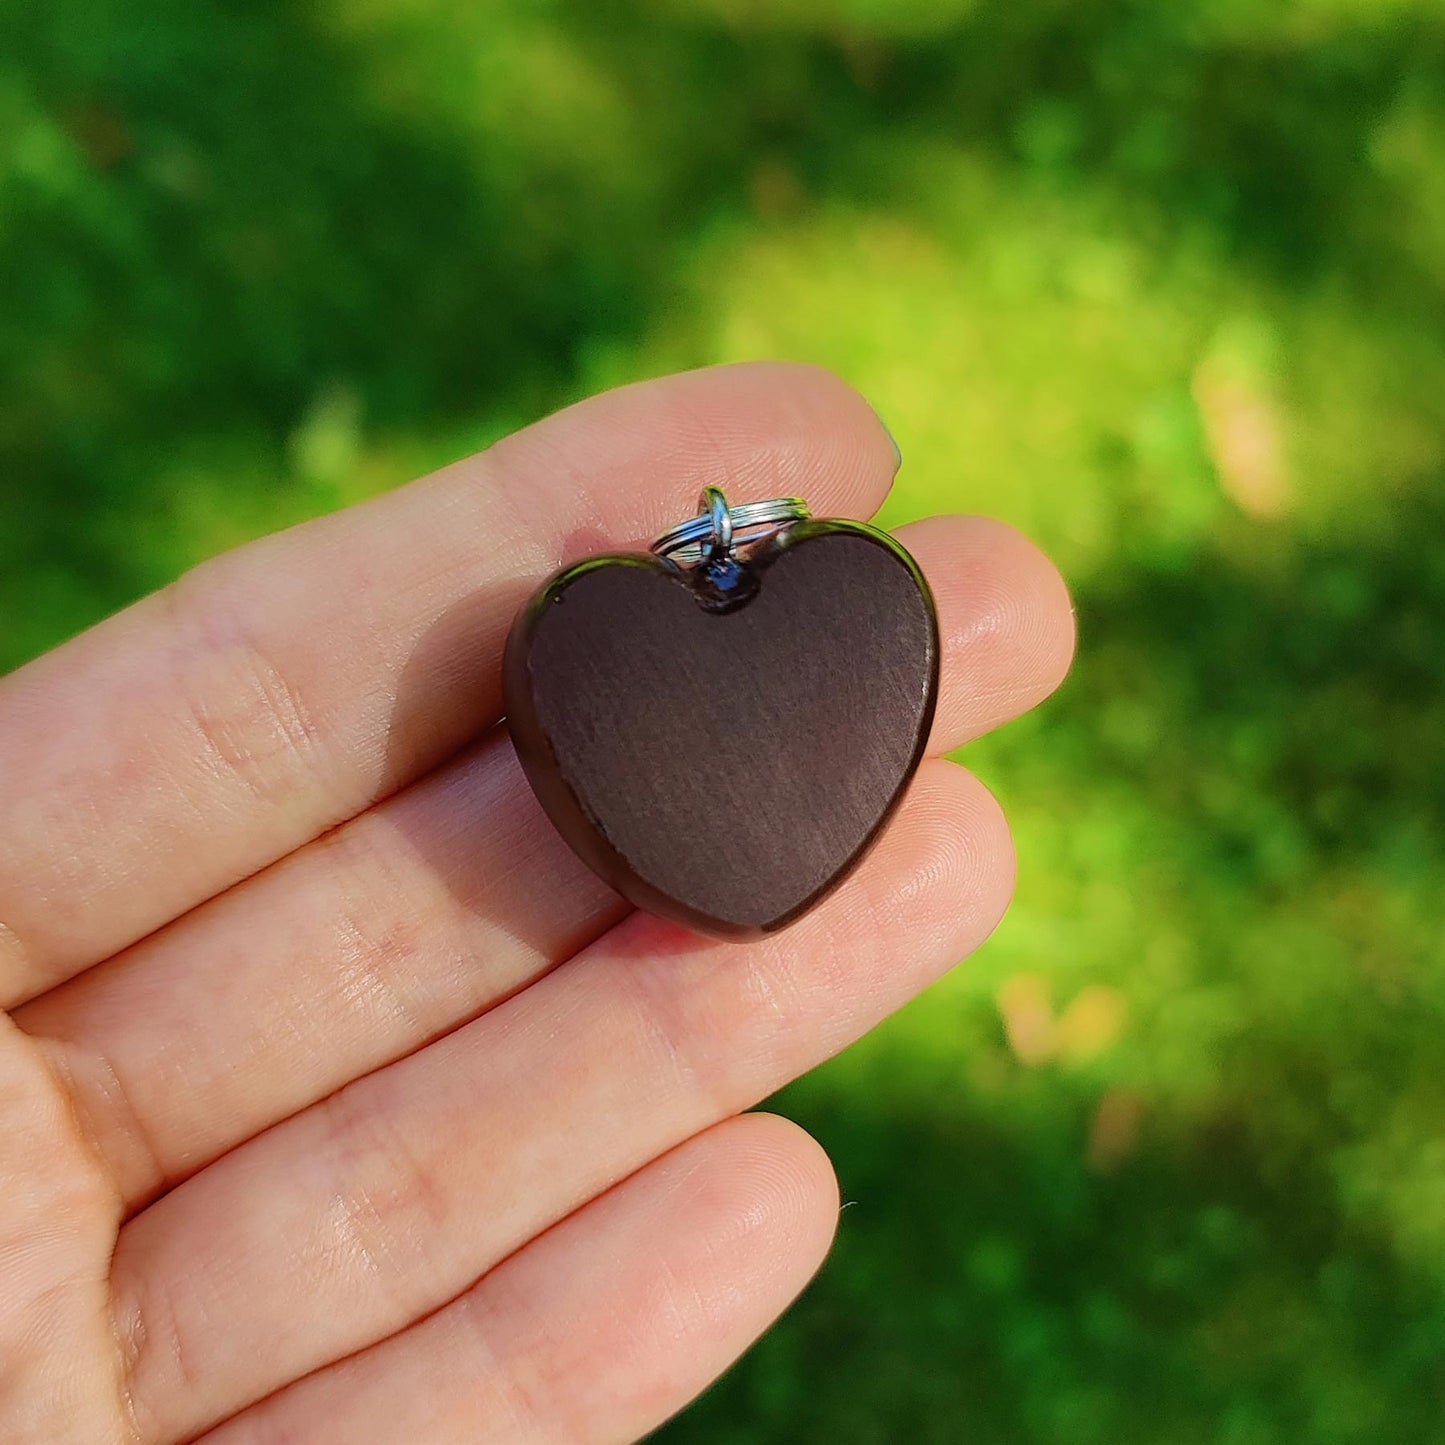 Kids or Pets Heart Shape Orgonite Necklace with Celestial Symbols For Heart (Anahata) Chakra